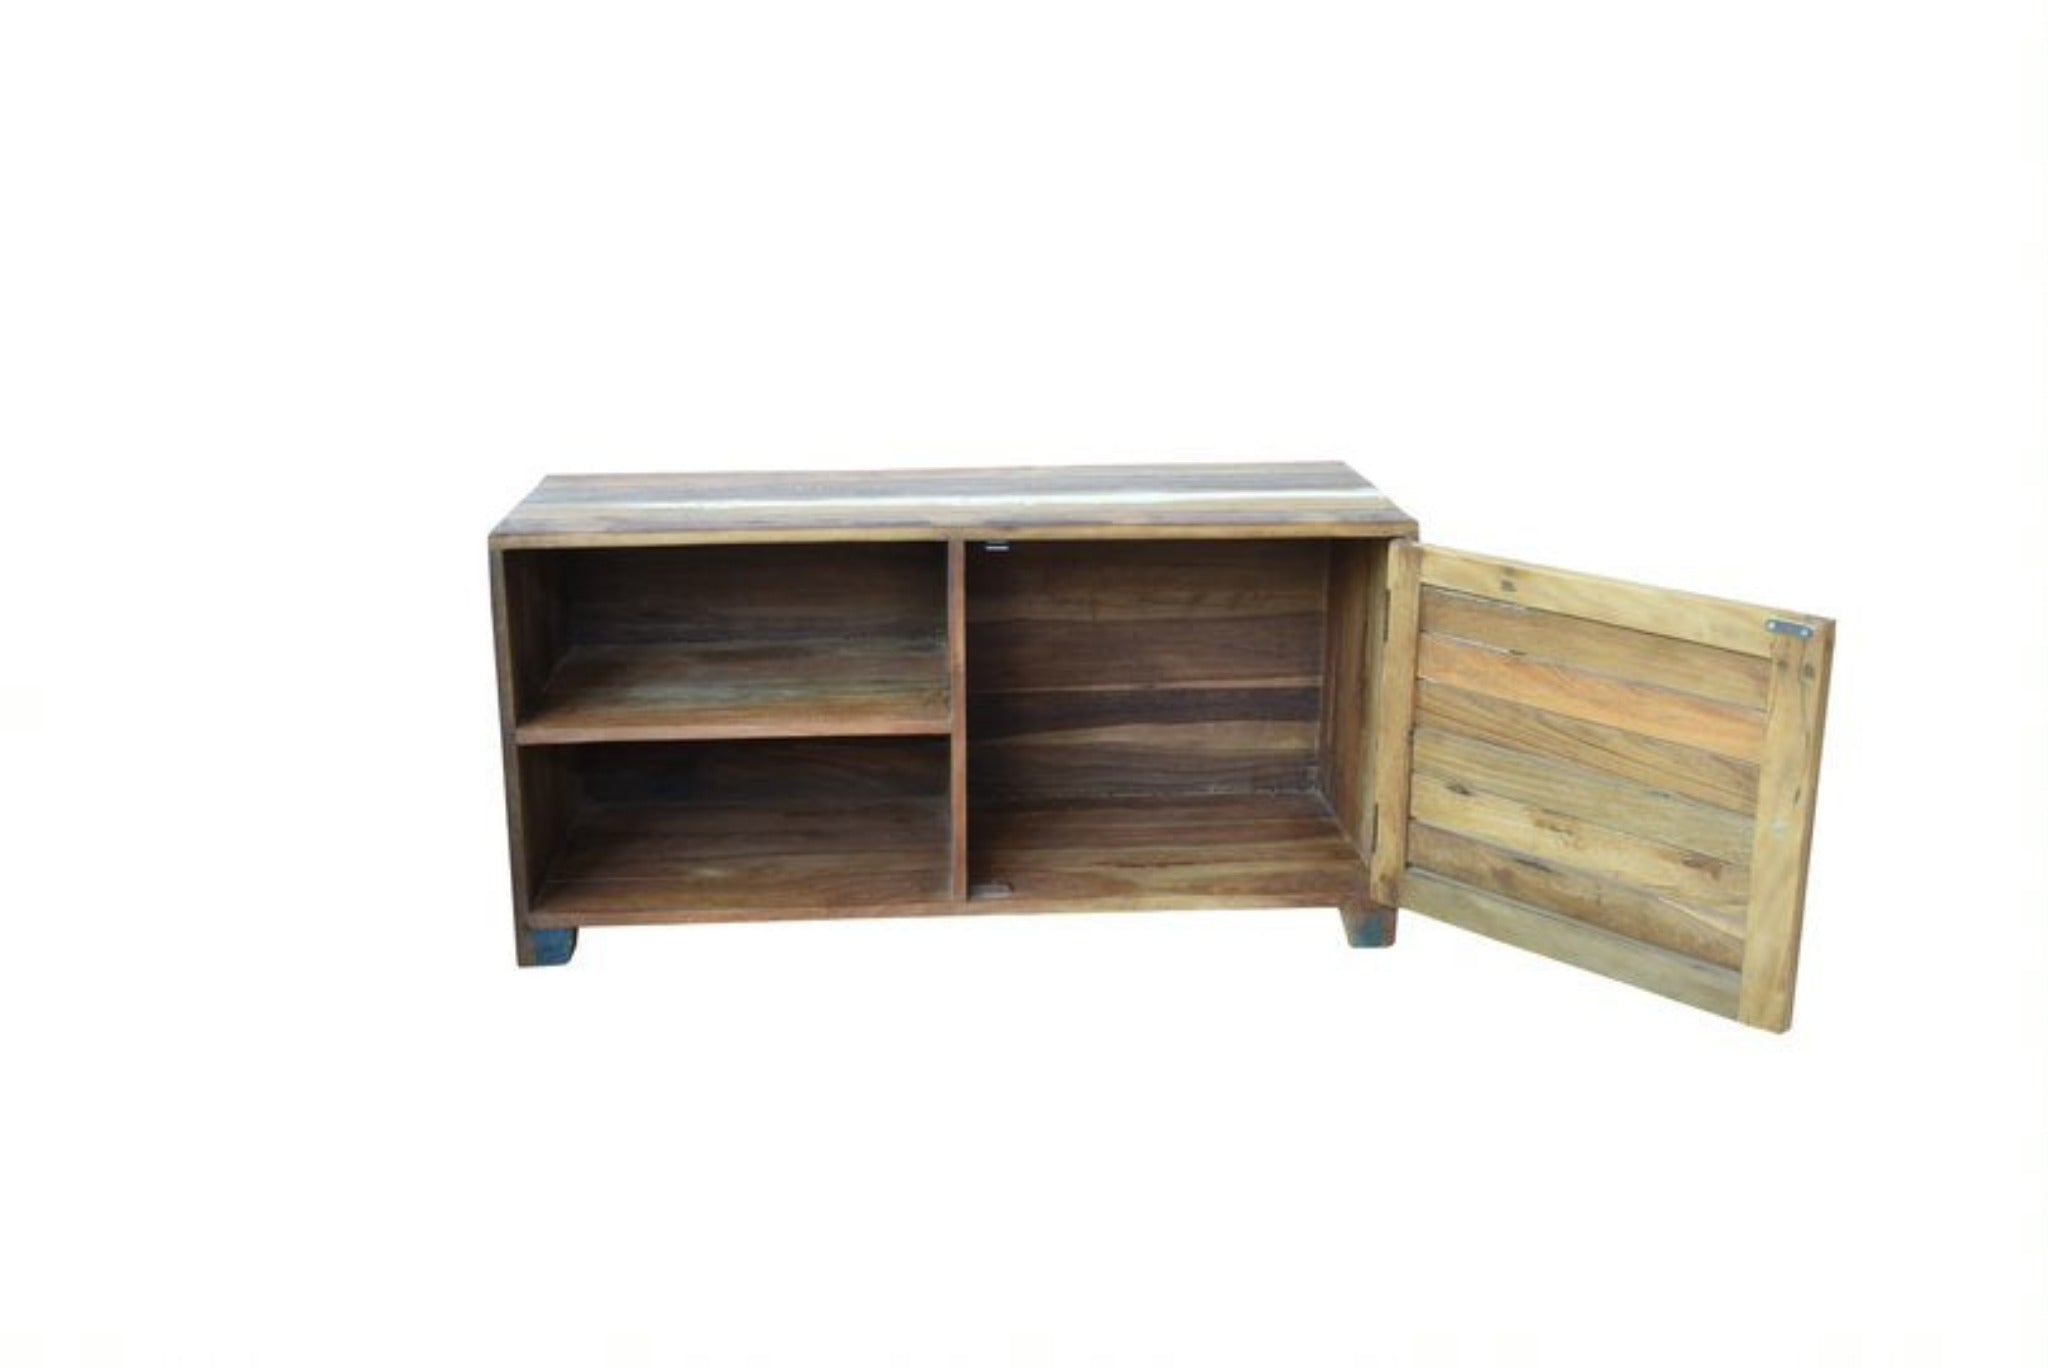 Wild TV Unit handmade from Solid reclaimed front view of unit with open door on right hand side